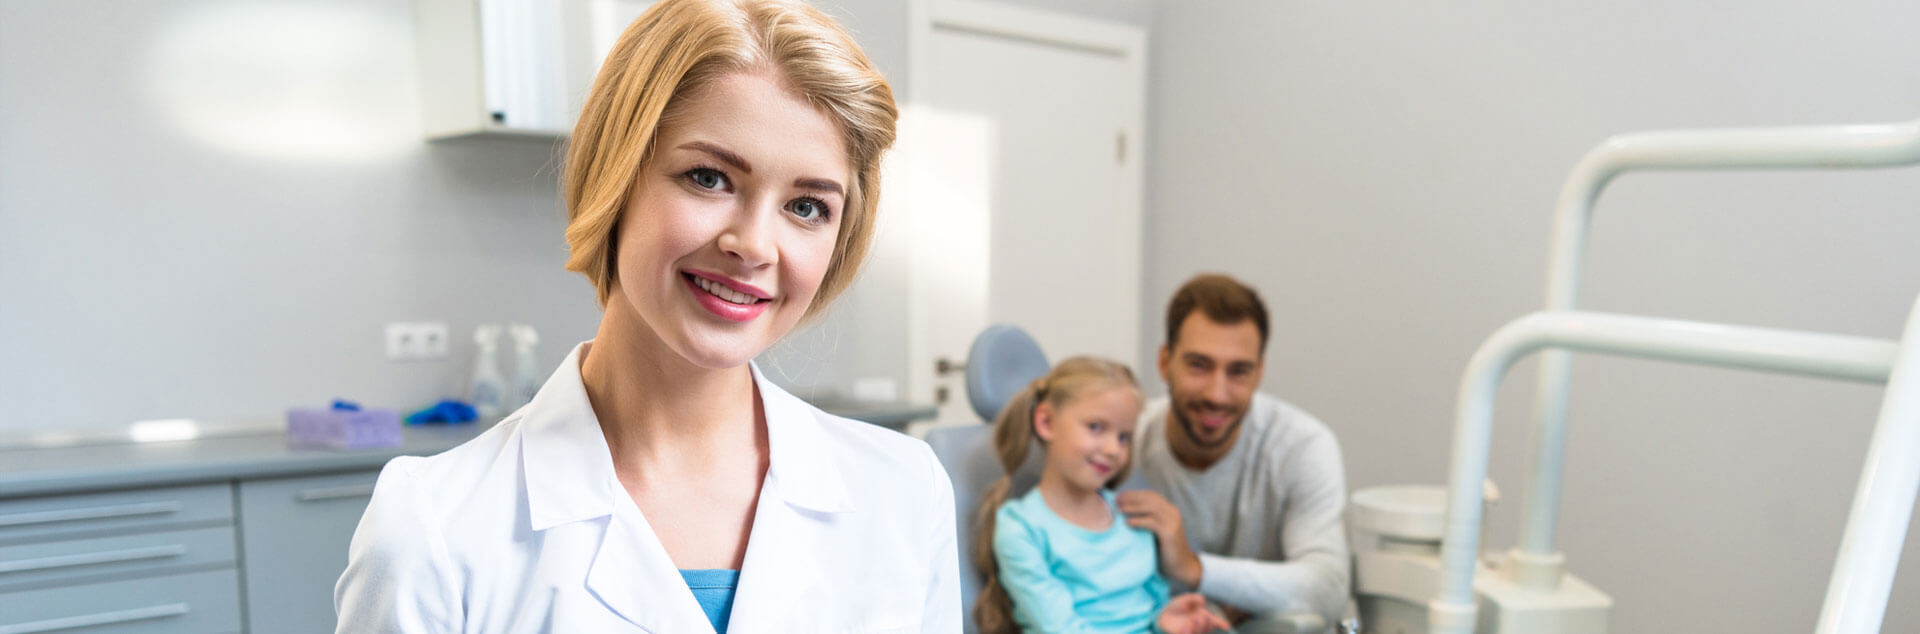 Dental assistant smiling at the camera with small kid and male person behind